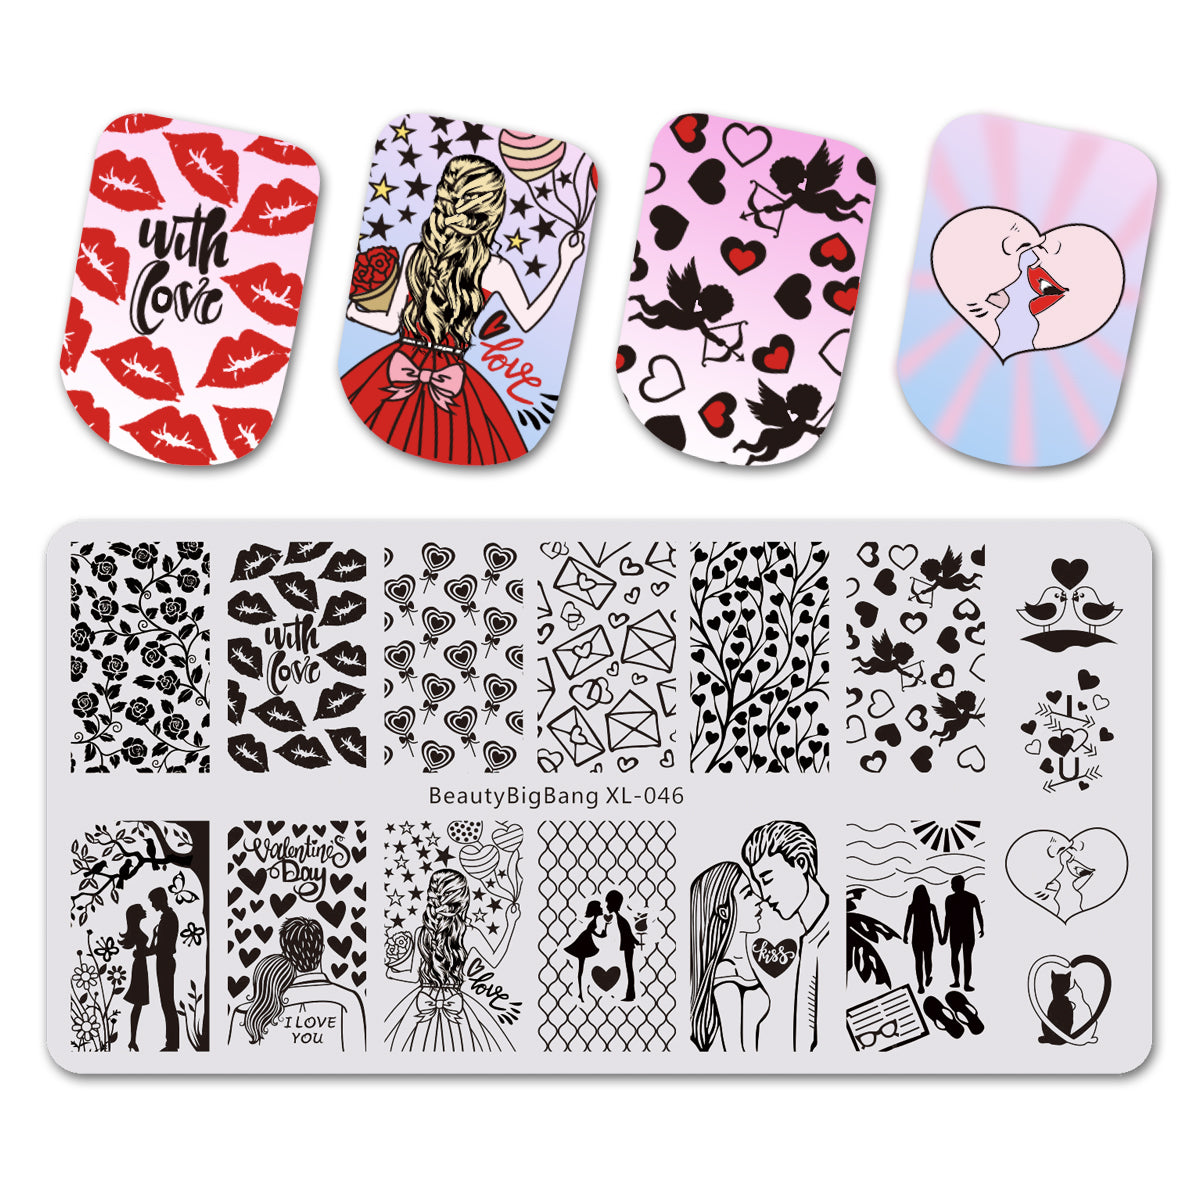 Buy Cool Maker Nail Art Stamping Kit With 5 Patterns To Decorate